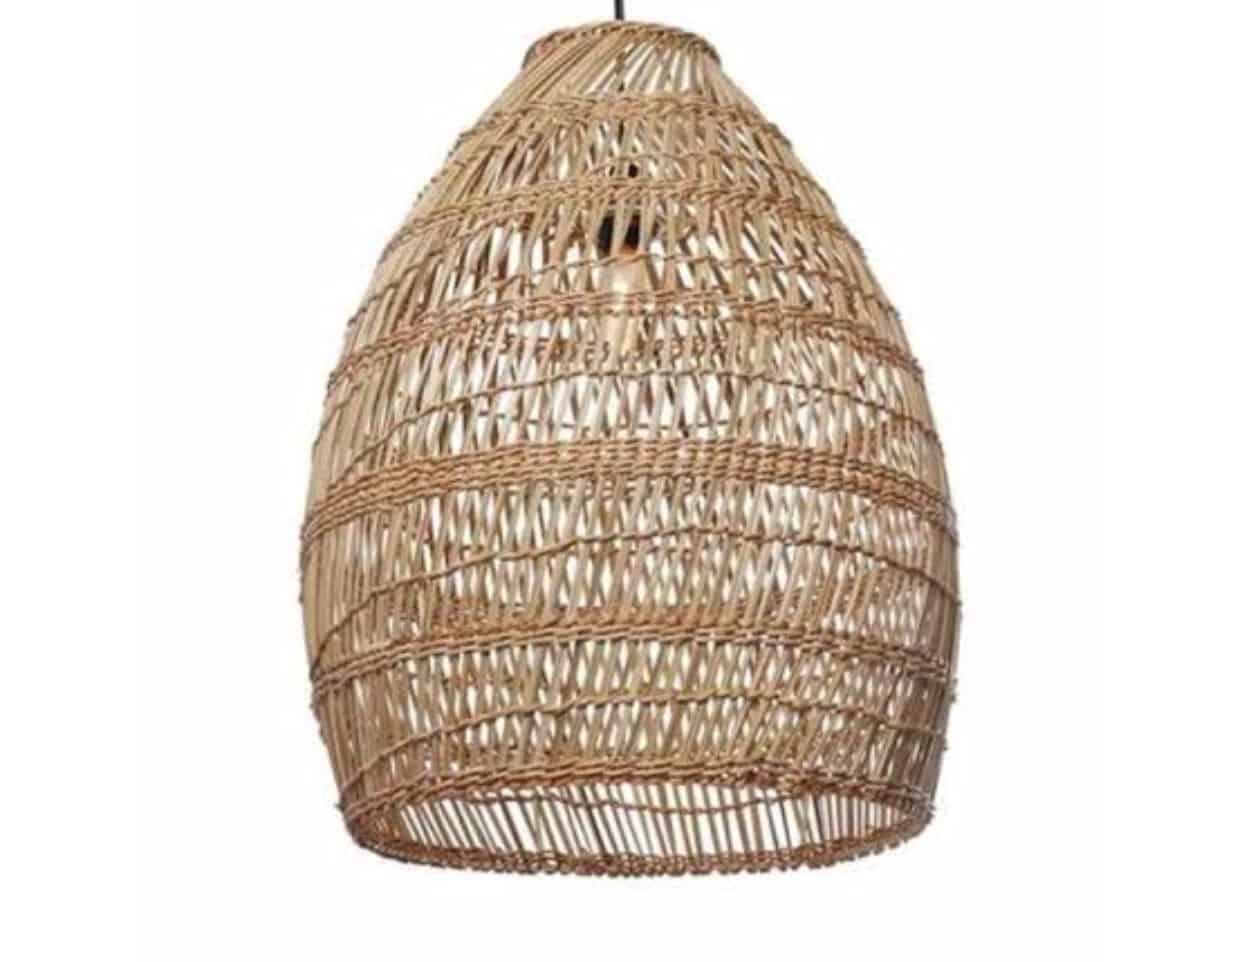 Rattan Lamp Shade Hire In Style, Large White Wicker Lampshade